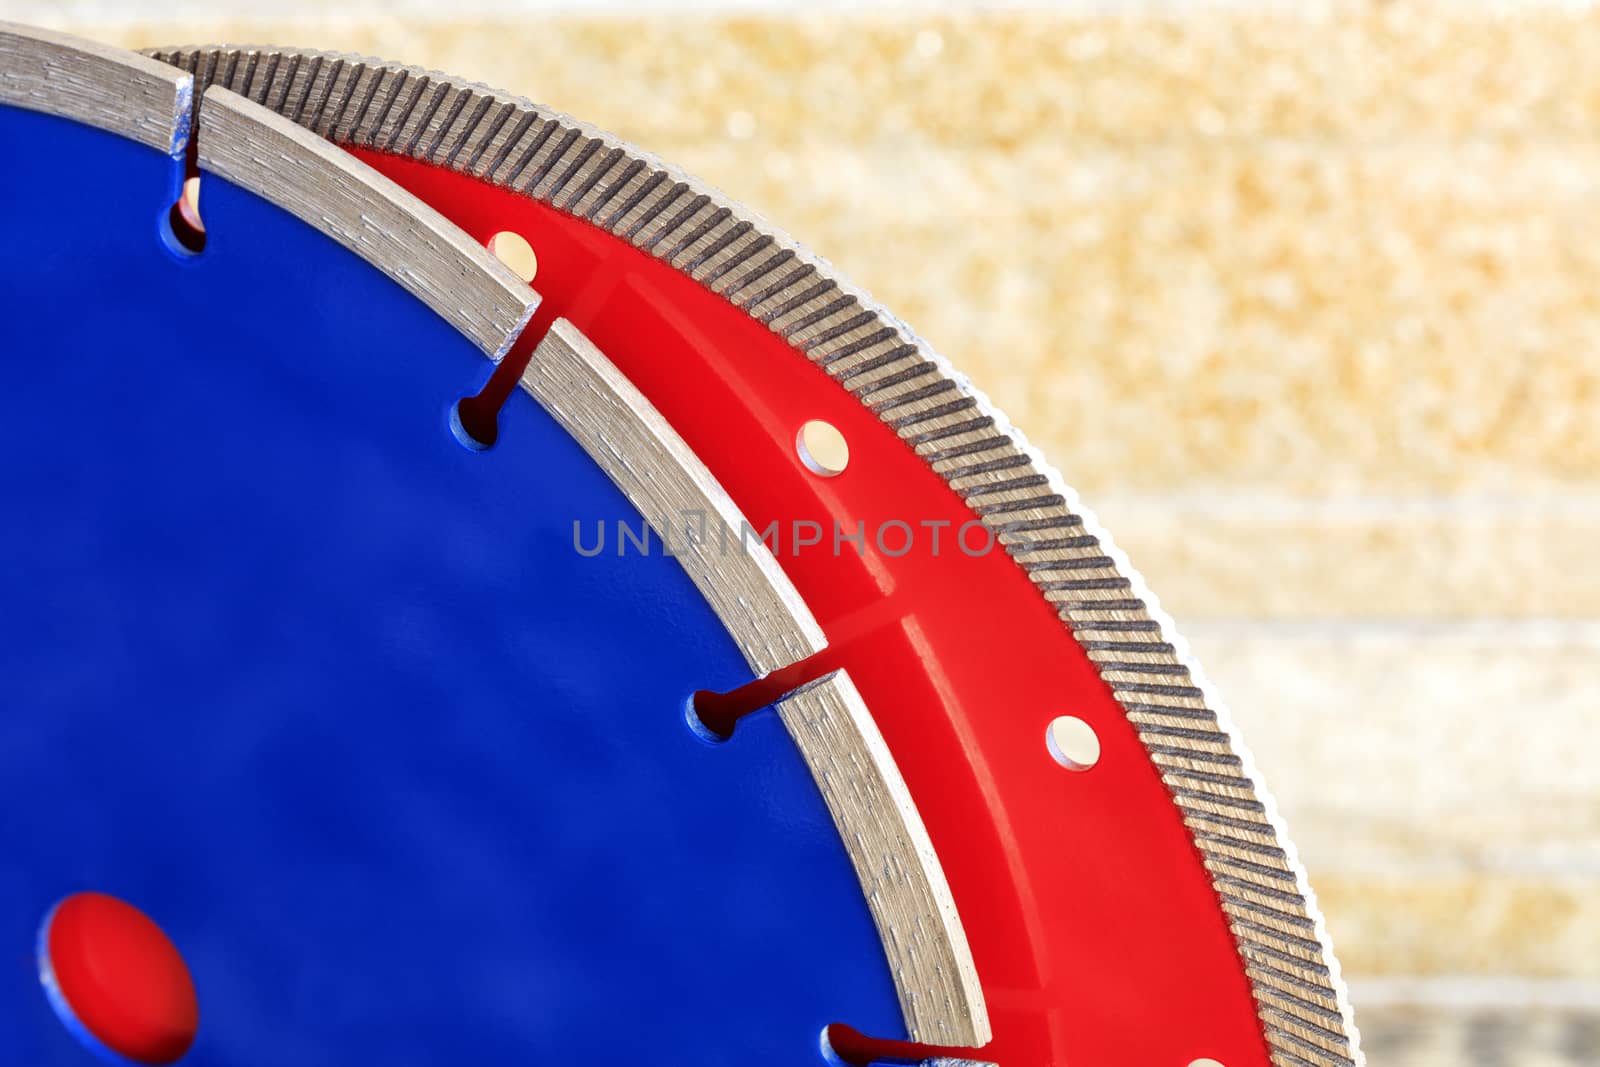 Diamond blades for granite and reinforced concrete against a background of orange-gold sandstone walls. by Sergii